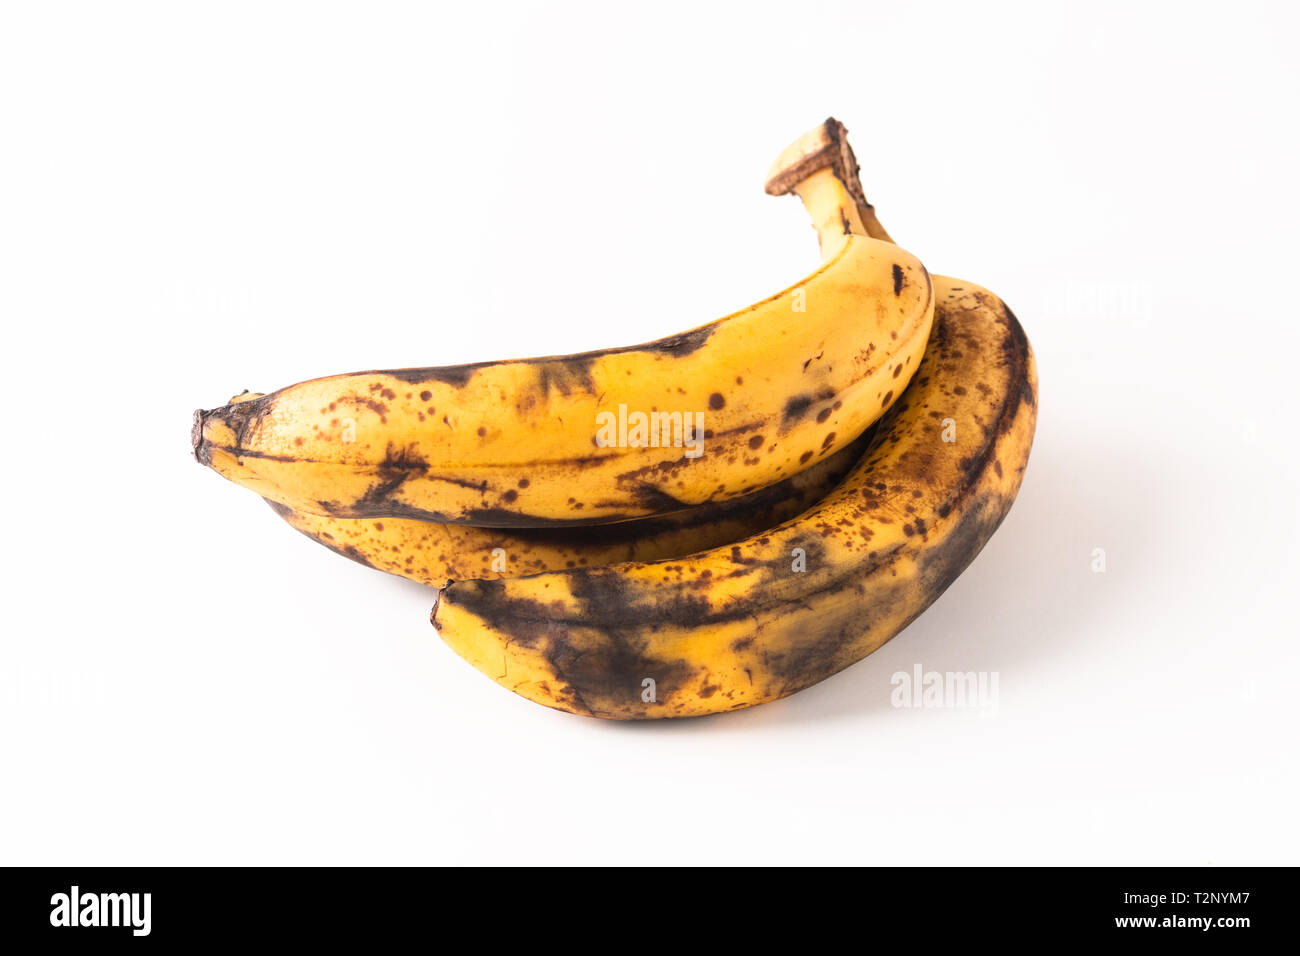 Food concept Overripe stage of bananas isolated on white background Stock Photo